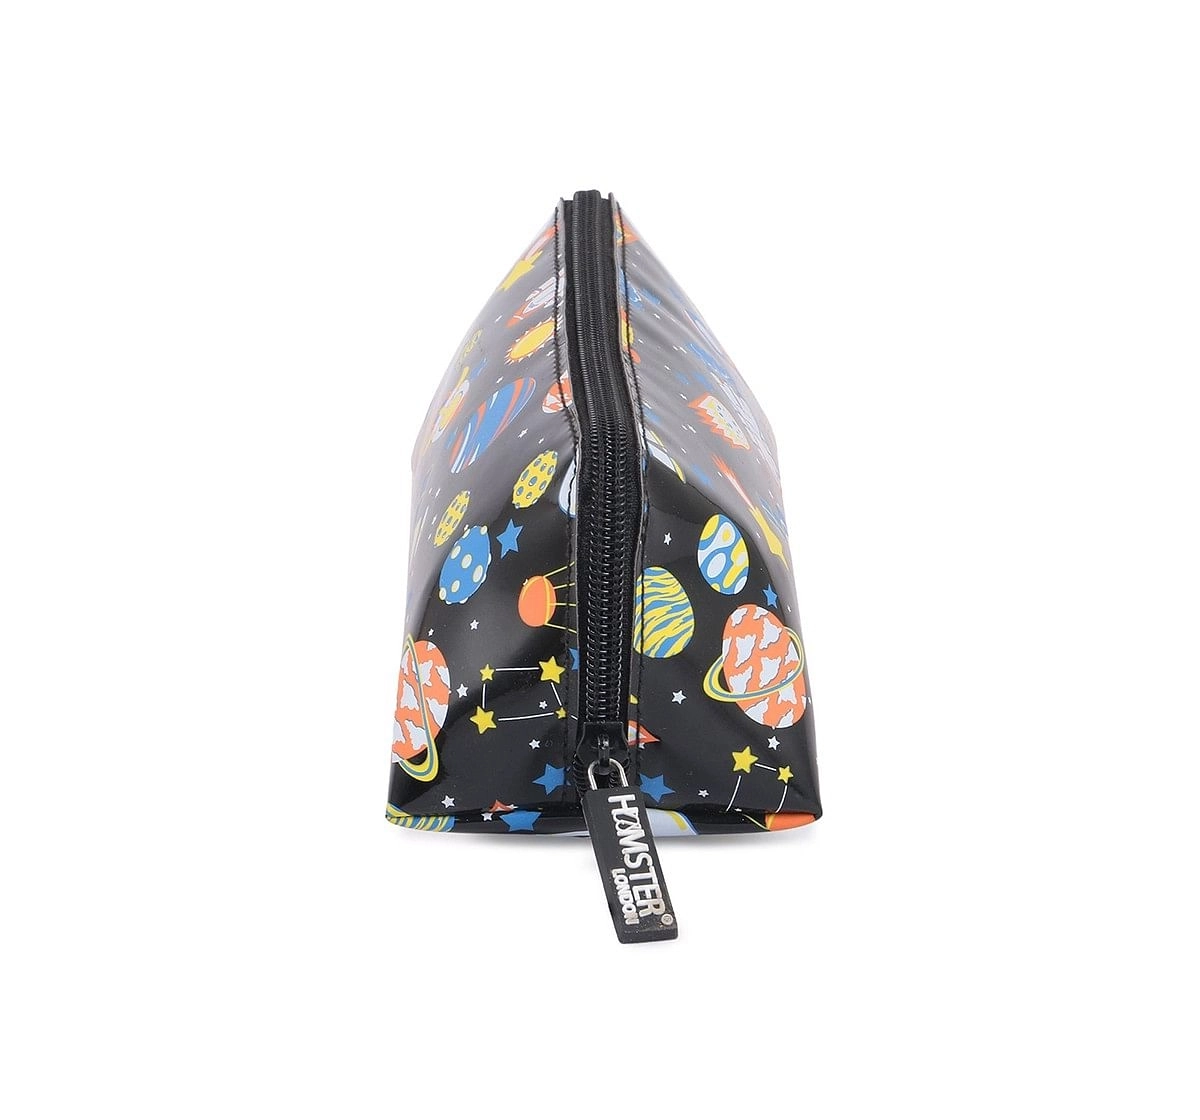 Hamster London Triangular Space Pouch for Kids age 3Y+ (Black)